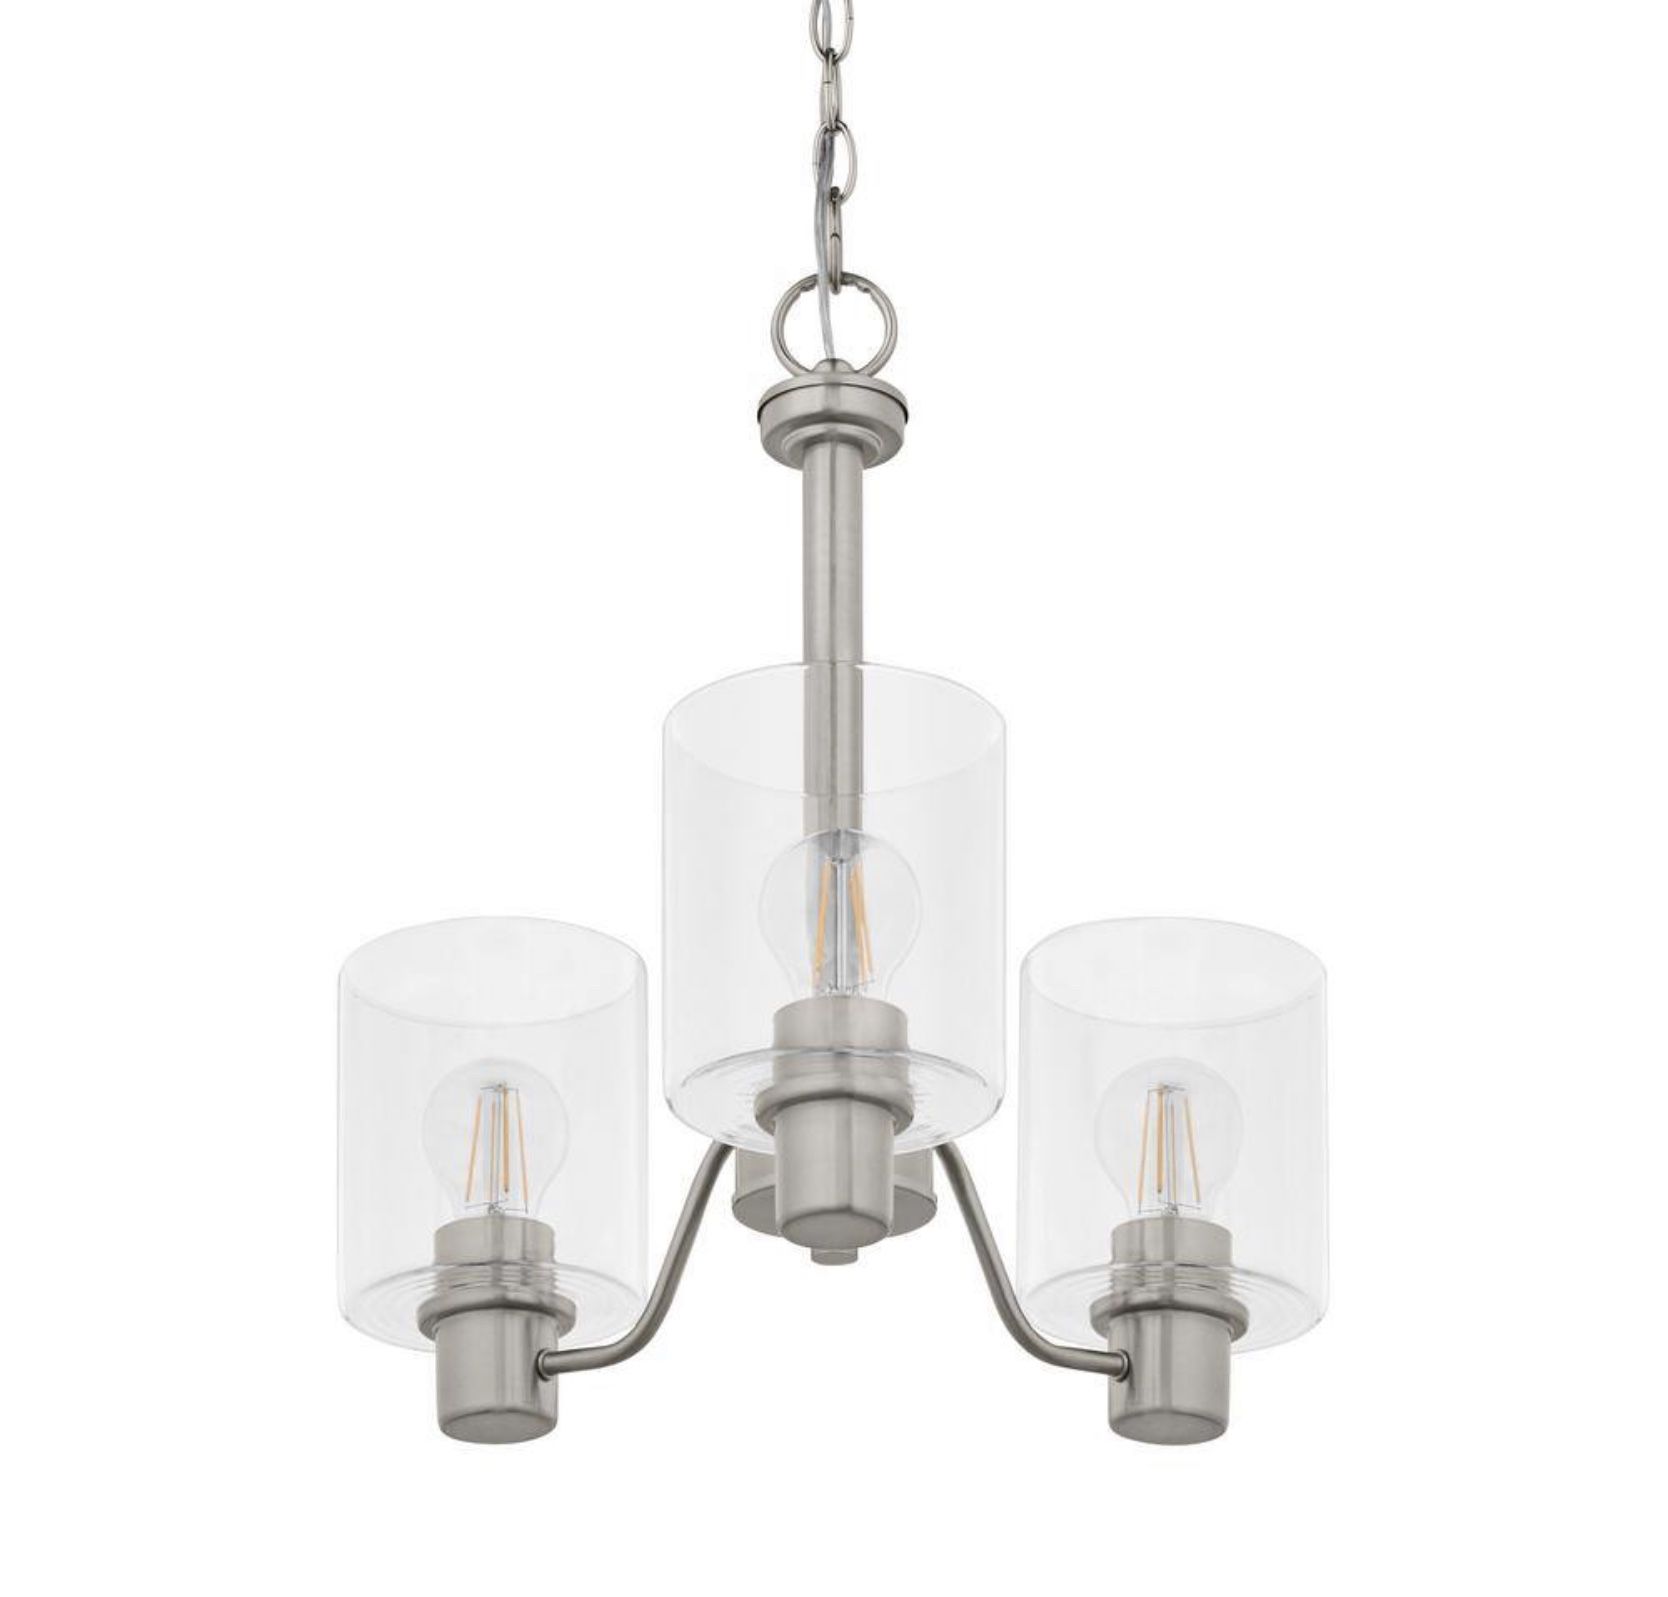 Hampton Bay Castleford 3-Light Brushed Nickel Chandelier with Clear Glass Shades For Dining Rooms $49  Luke’s liquidations warehouse Address:  2434 no